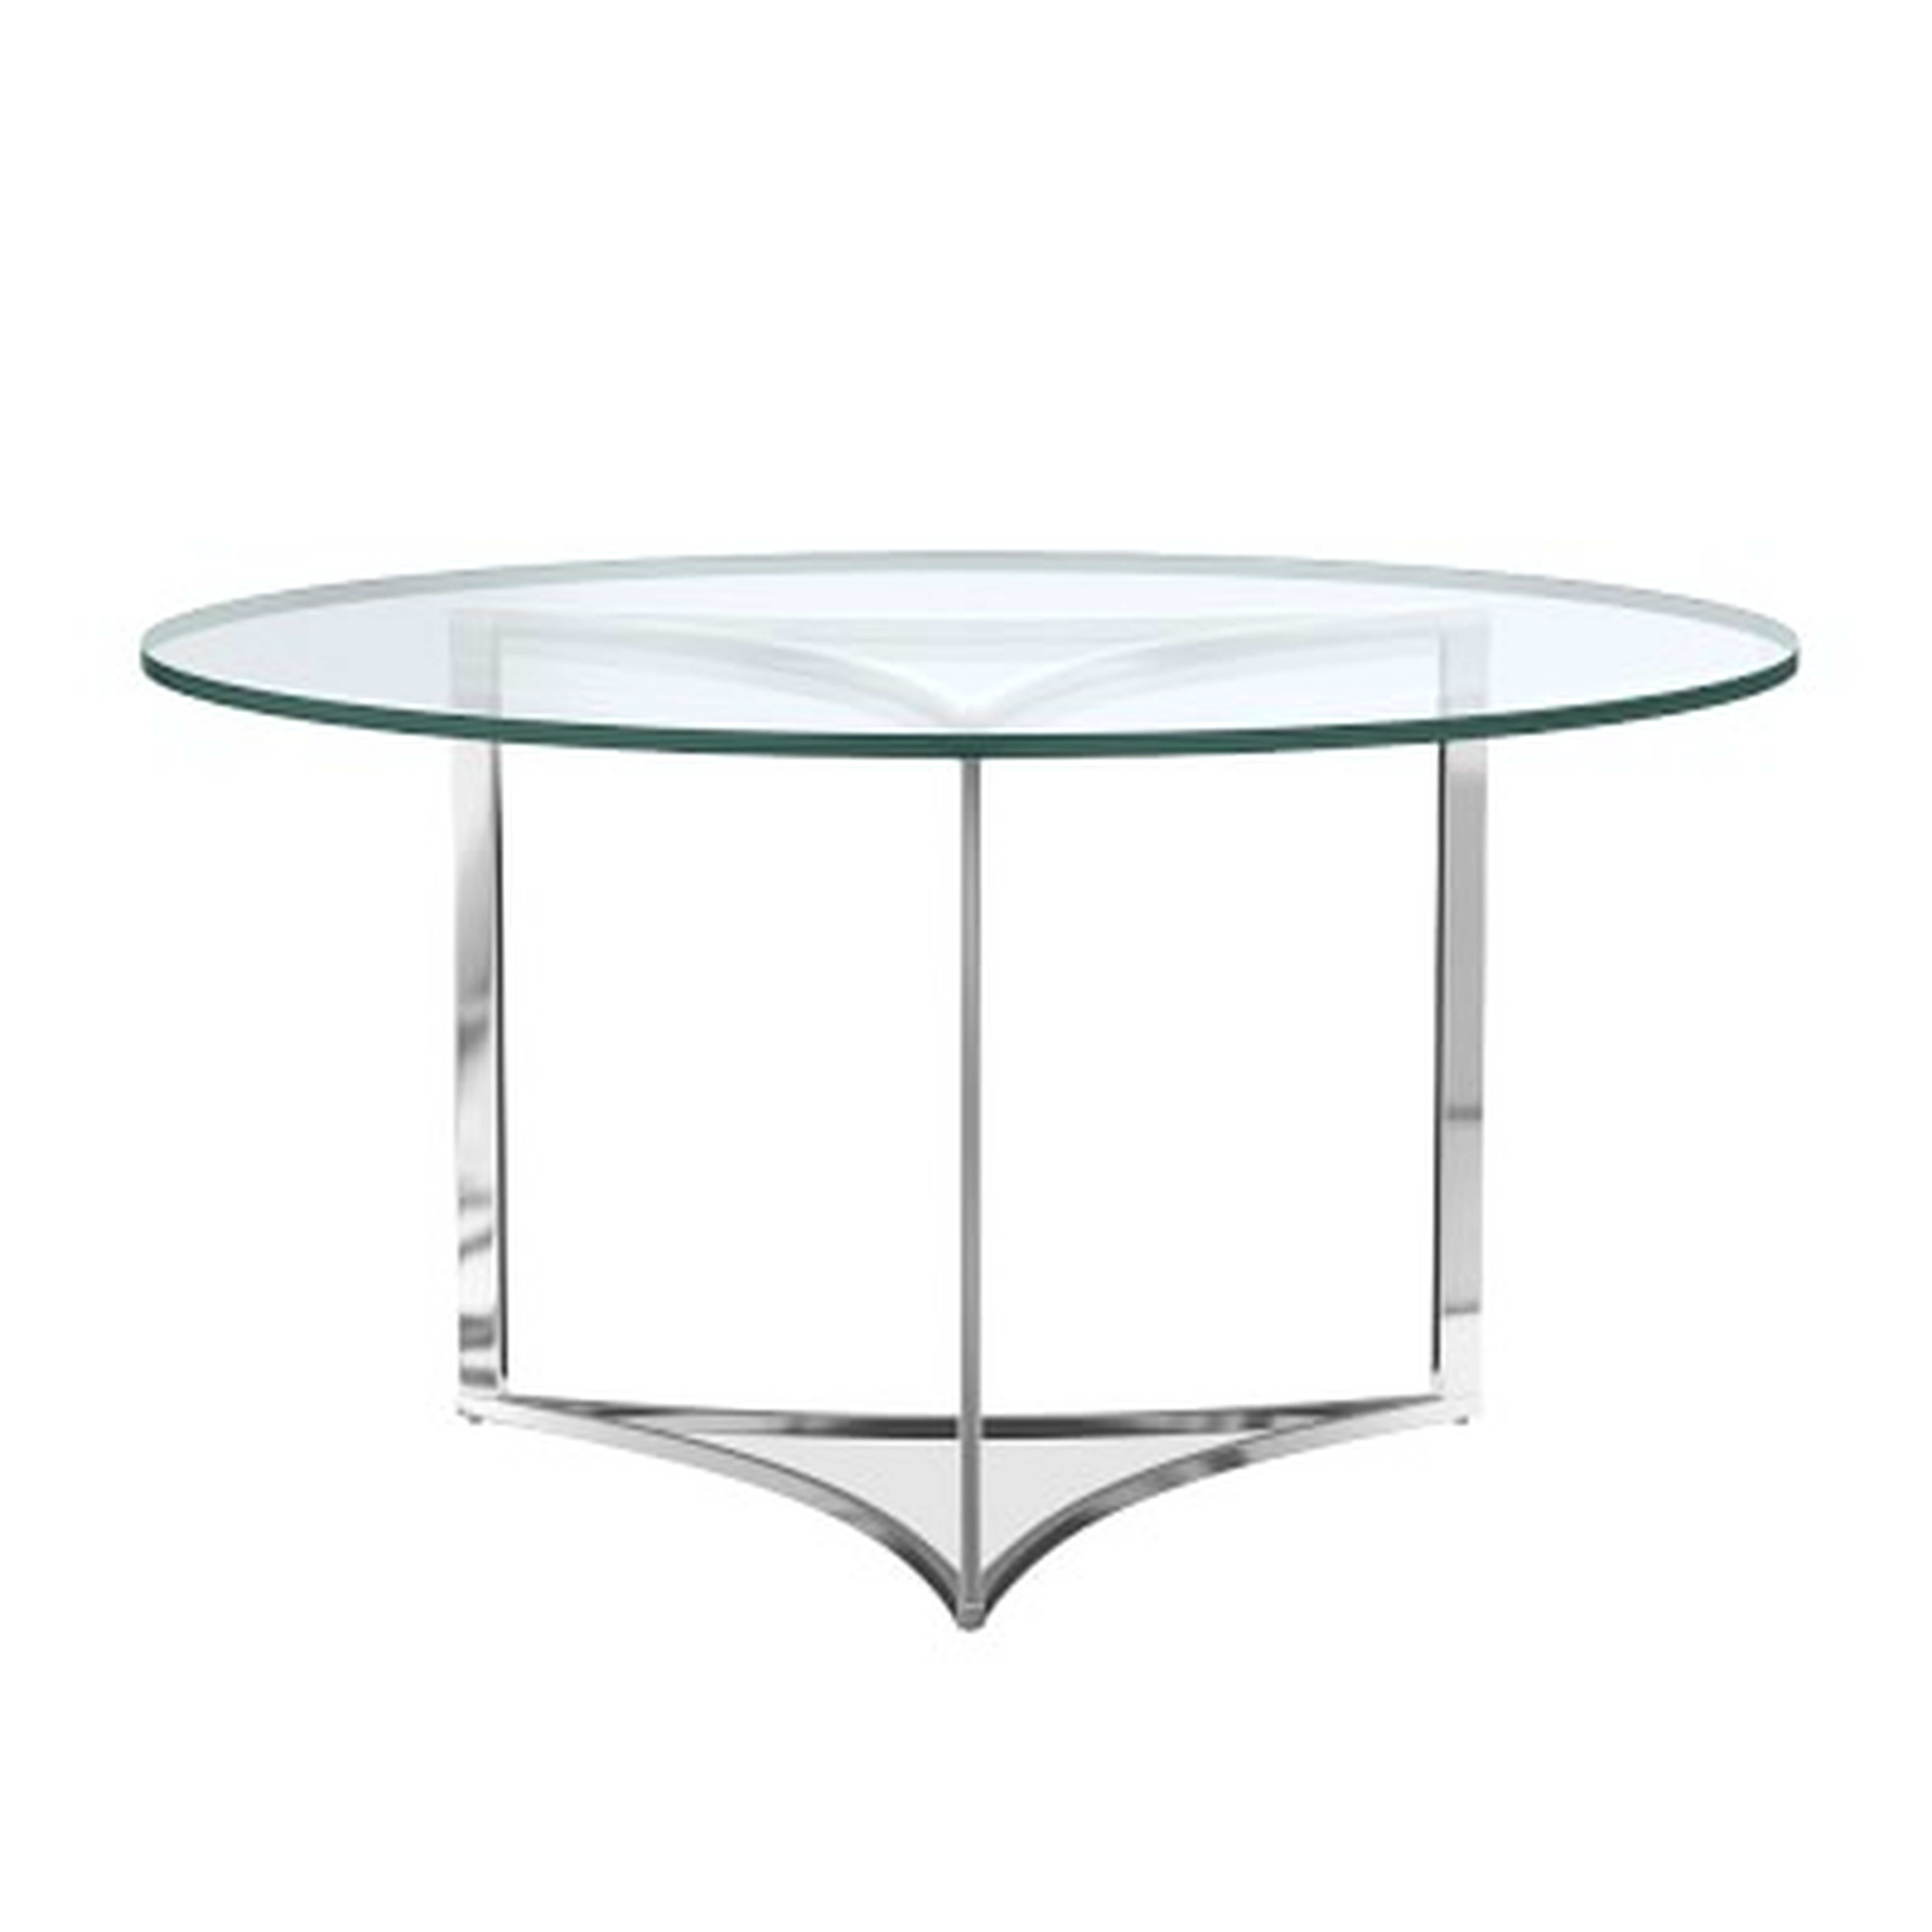 Trefoil Dining Table With Glass Top, Round, 56 - Williams Sonoma